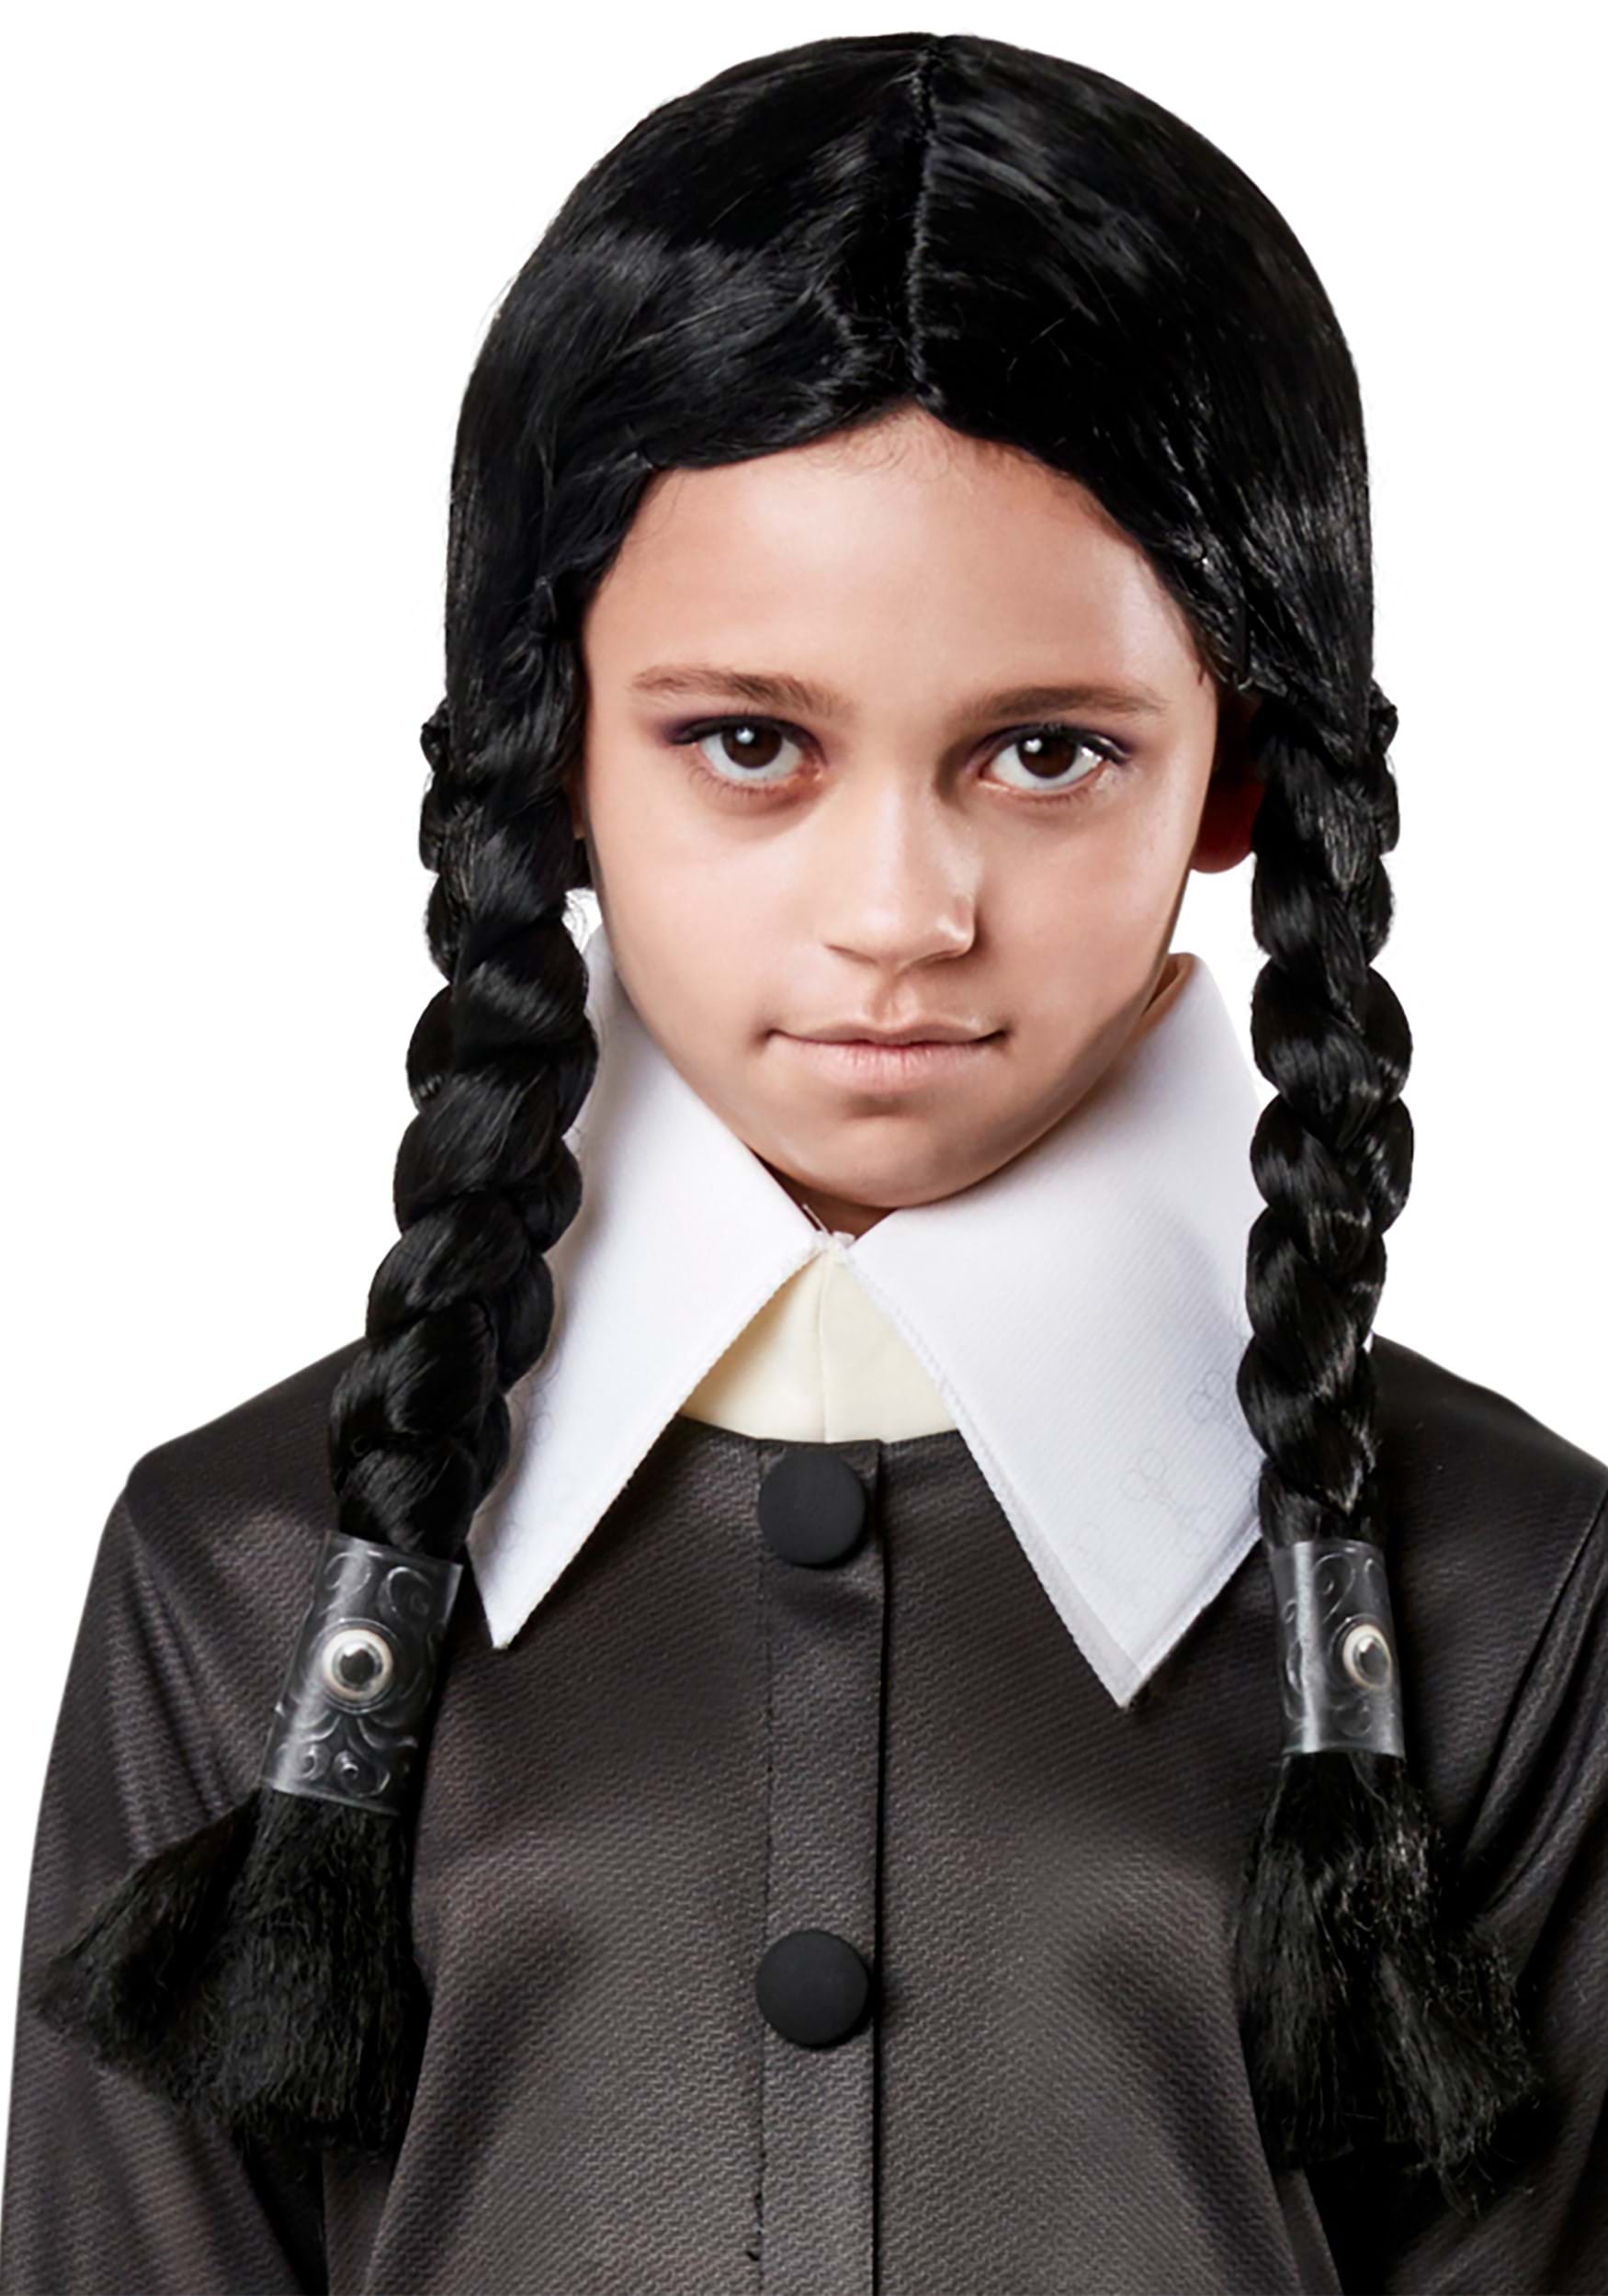 The Adams Family 2 Wednesday Kid’s Wig with Braids